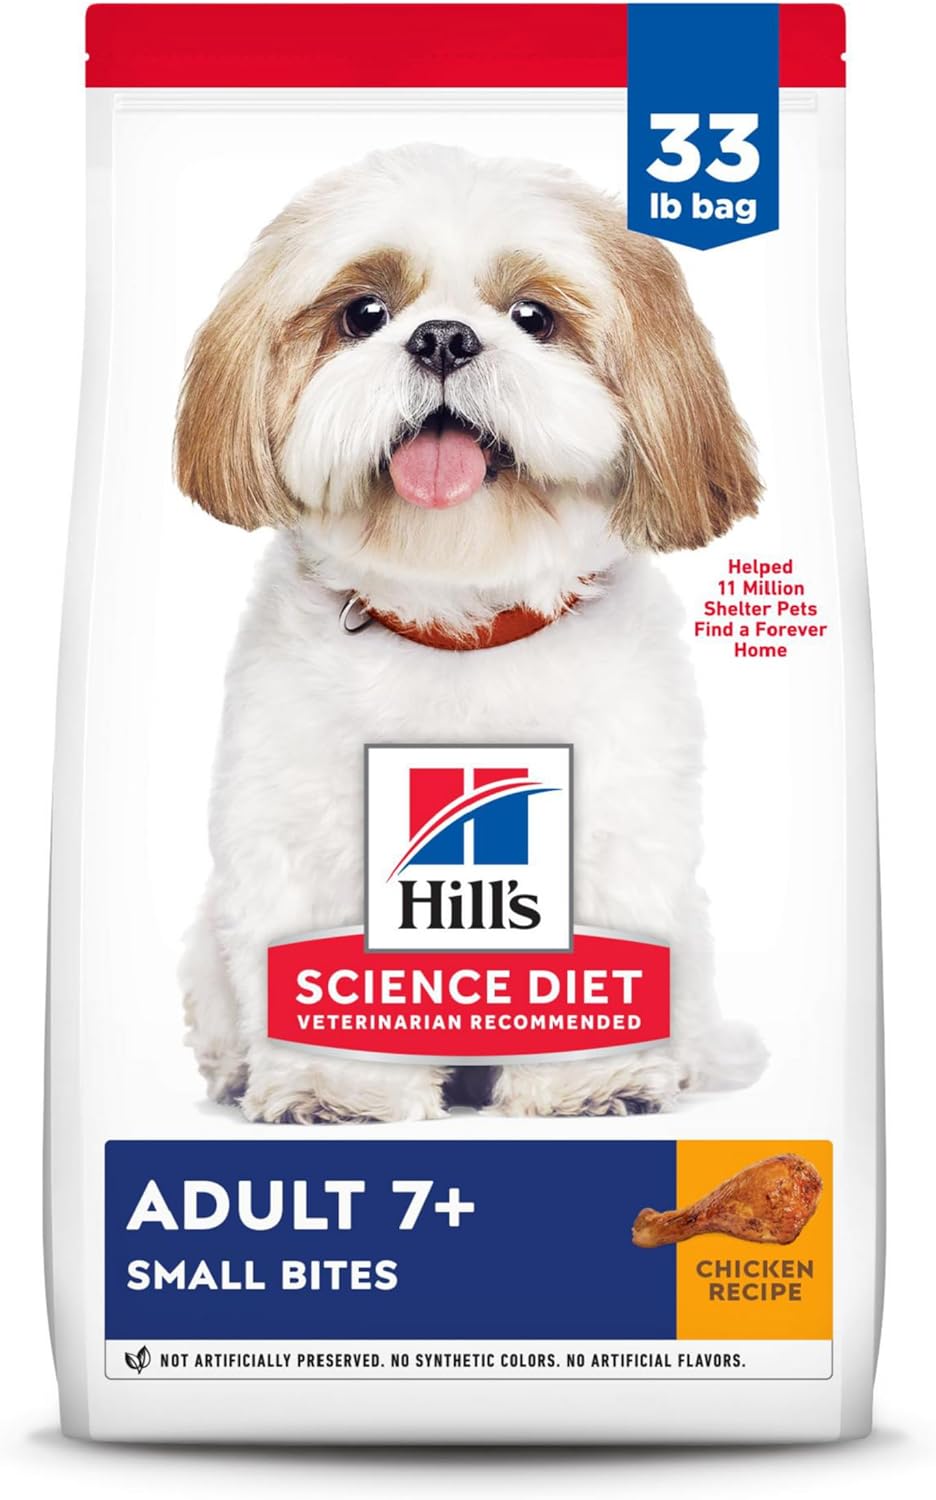 Hill's Science Diet Adult 7+, Senior Adult 7+ Premium Nutrition, Small Kibble, Dry Dog Food, Chicken, Brown Rice, & Barley, 33 lb Bag